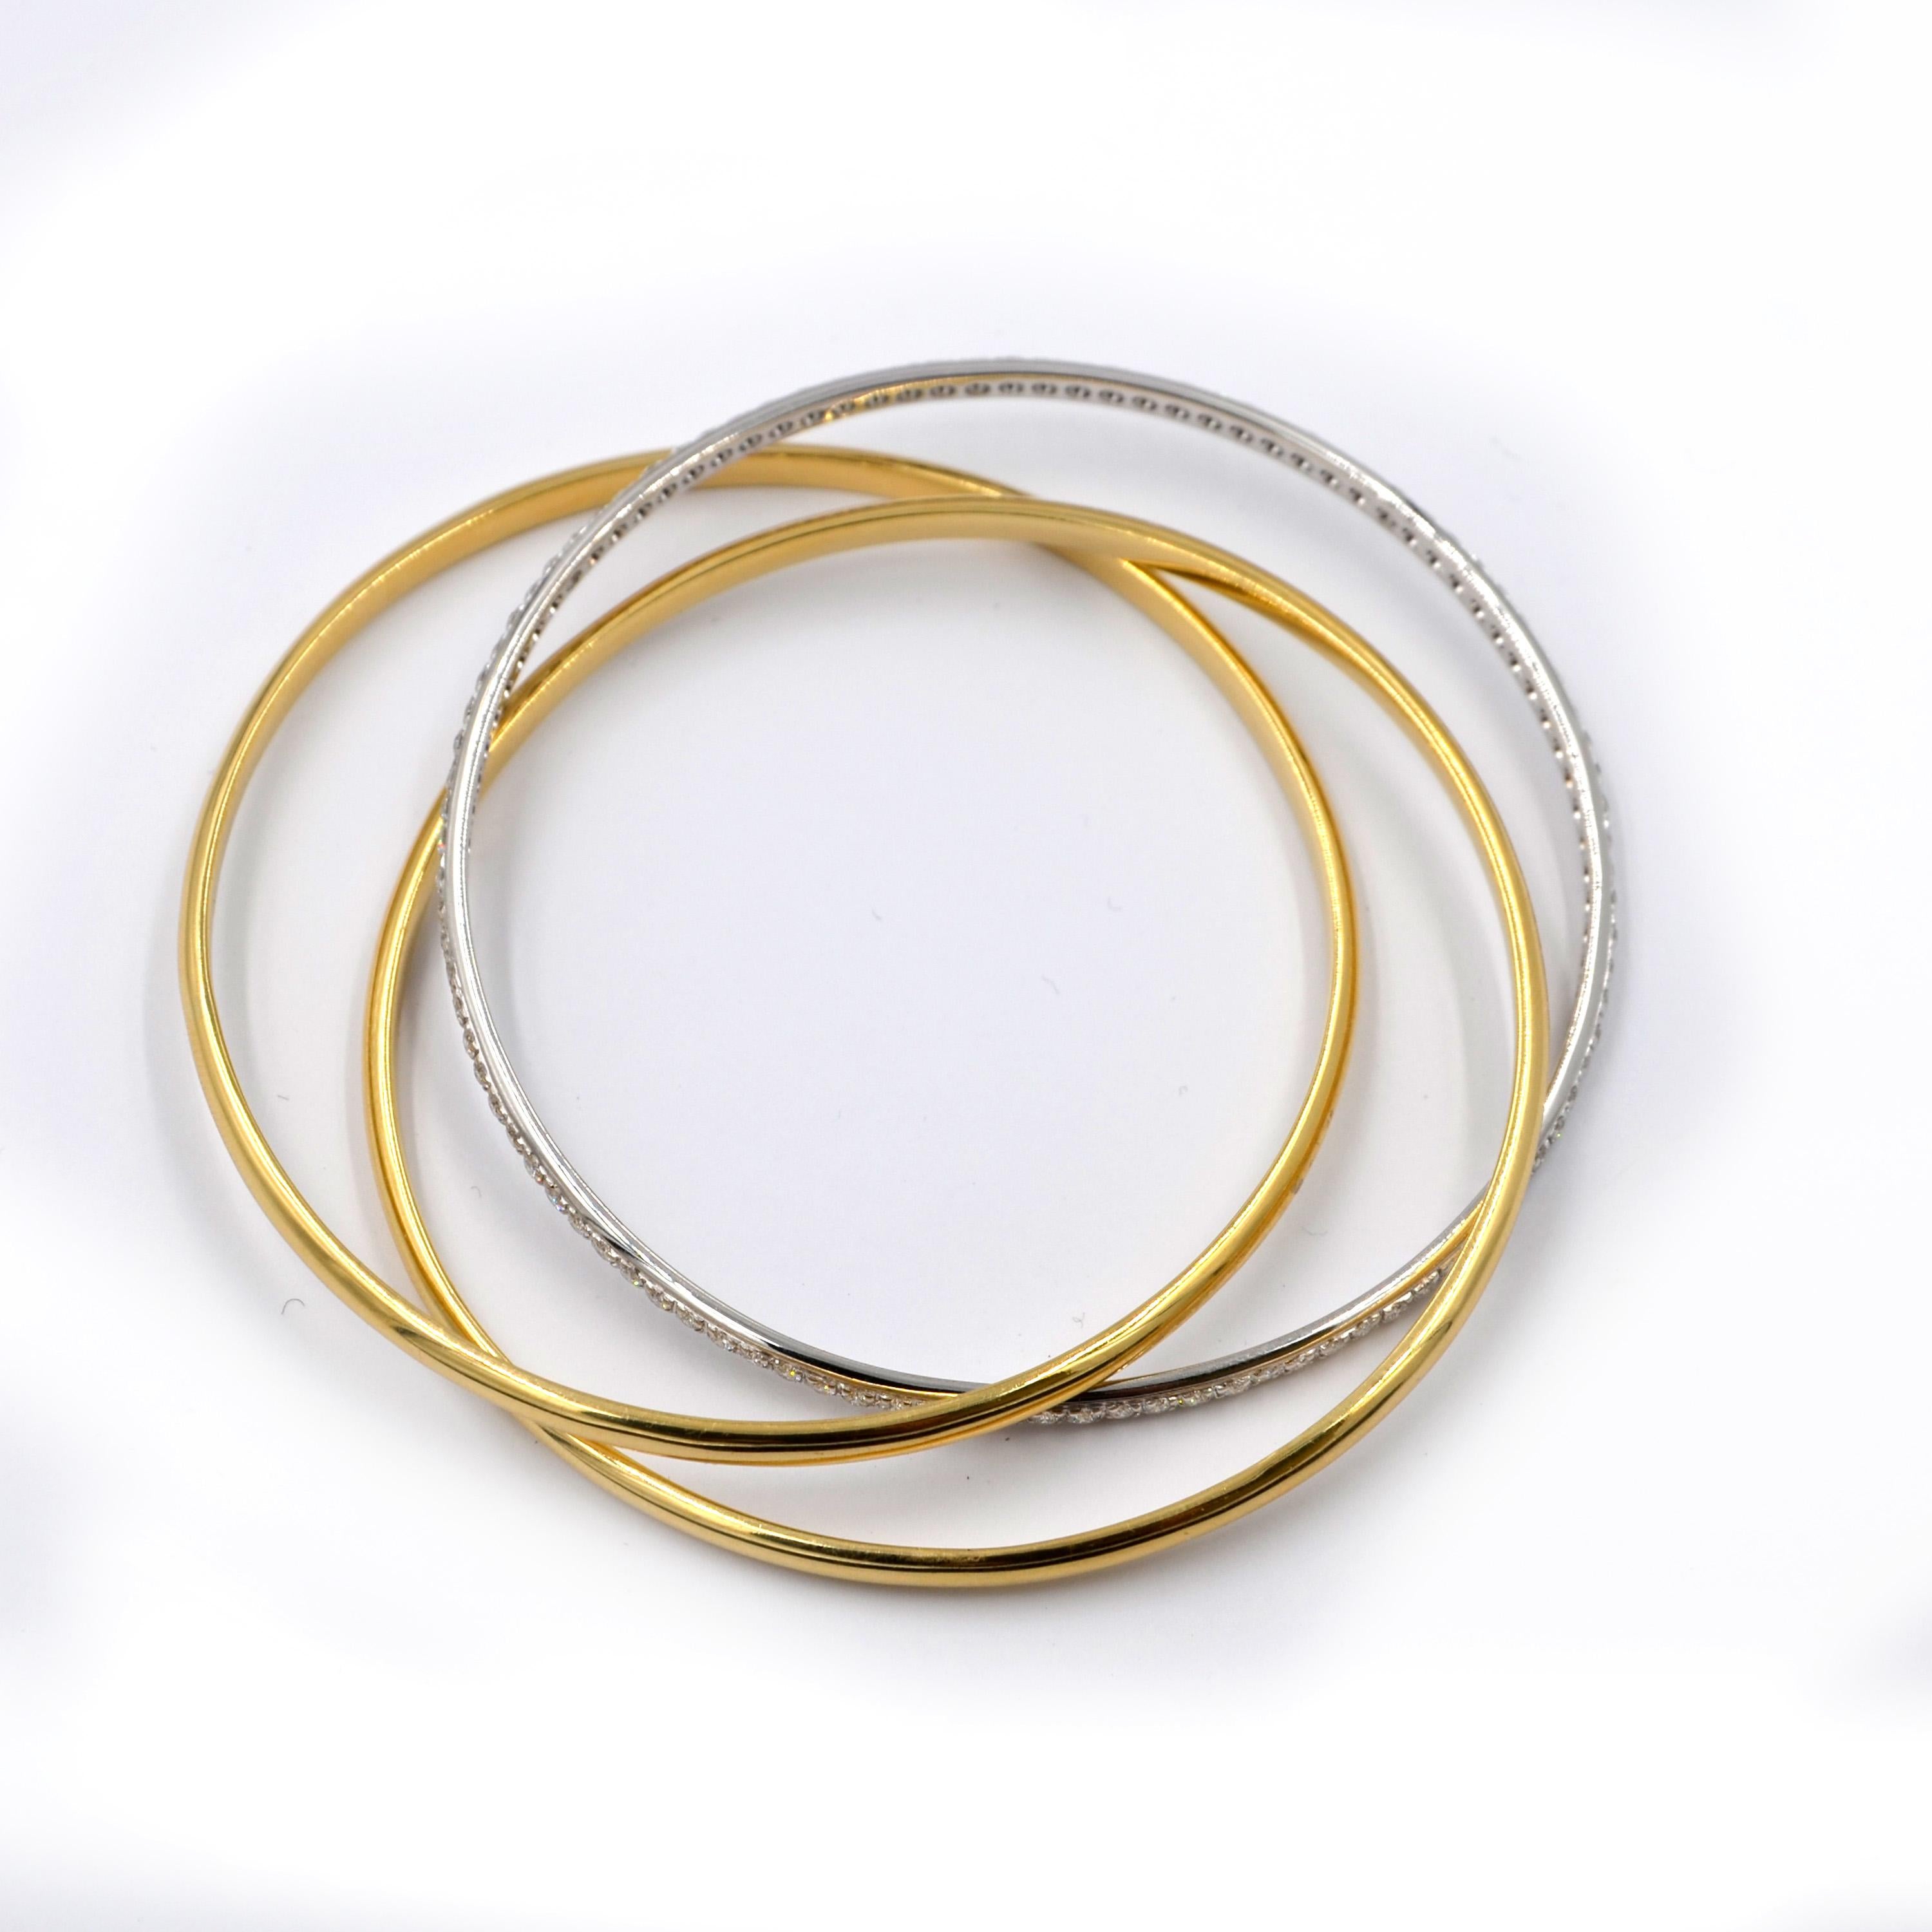 This gorgeous Rolling Bracelet from Garavelli is made with 18kt white and yellow gold and set with beautiful diamonds.
The design offers a combination of modern and classic elements, with its intertwining rolling bands.
Perfect for stack layering,